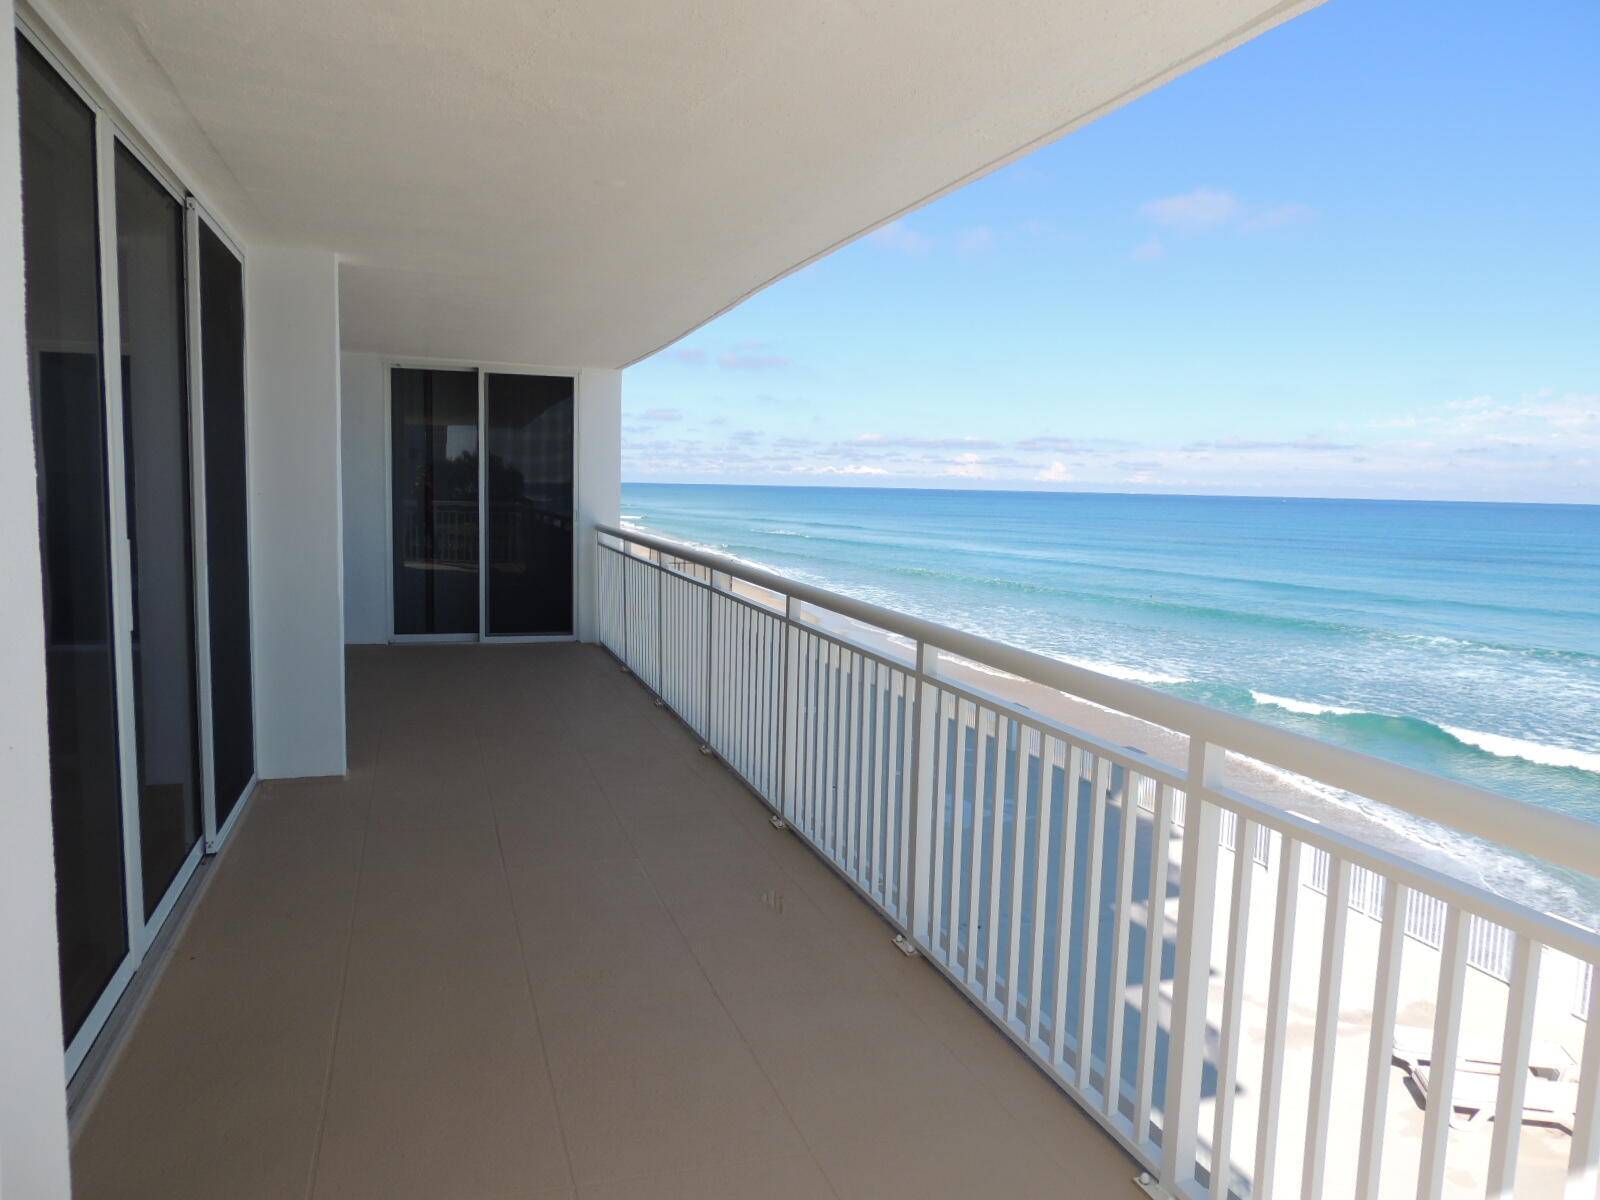 Indulge in the awe inspiring beauty of the Unobstructed South East Direct Ocean Views from the comfort of this exquisite Oceanfront condo.